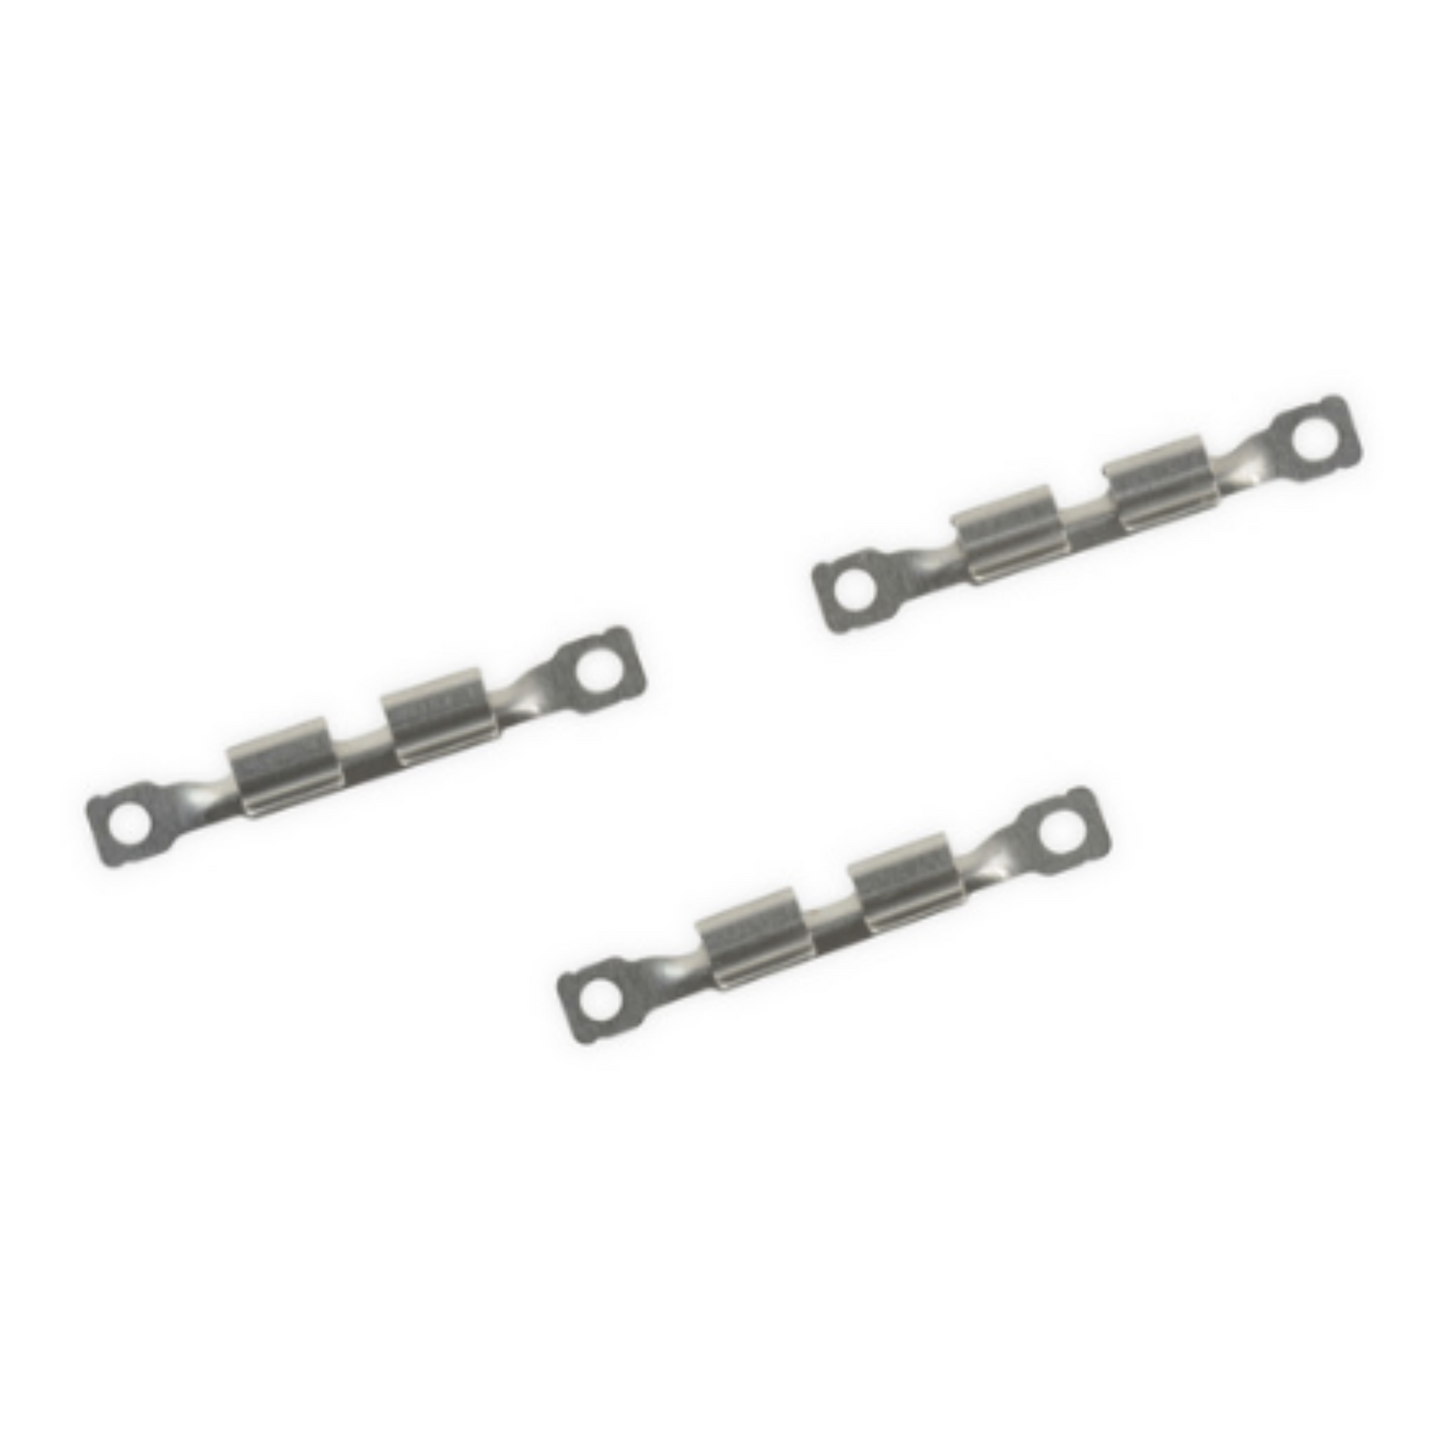 iPhone 7 Touch Screen Retaining Clips x3-